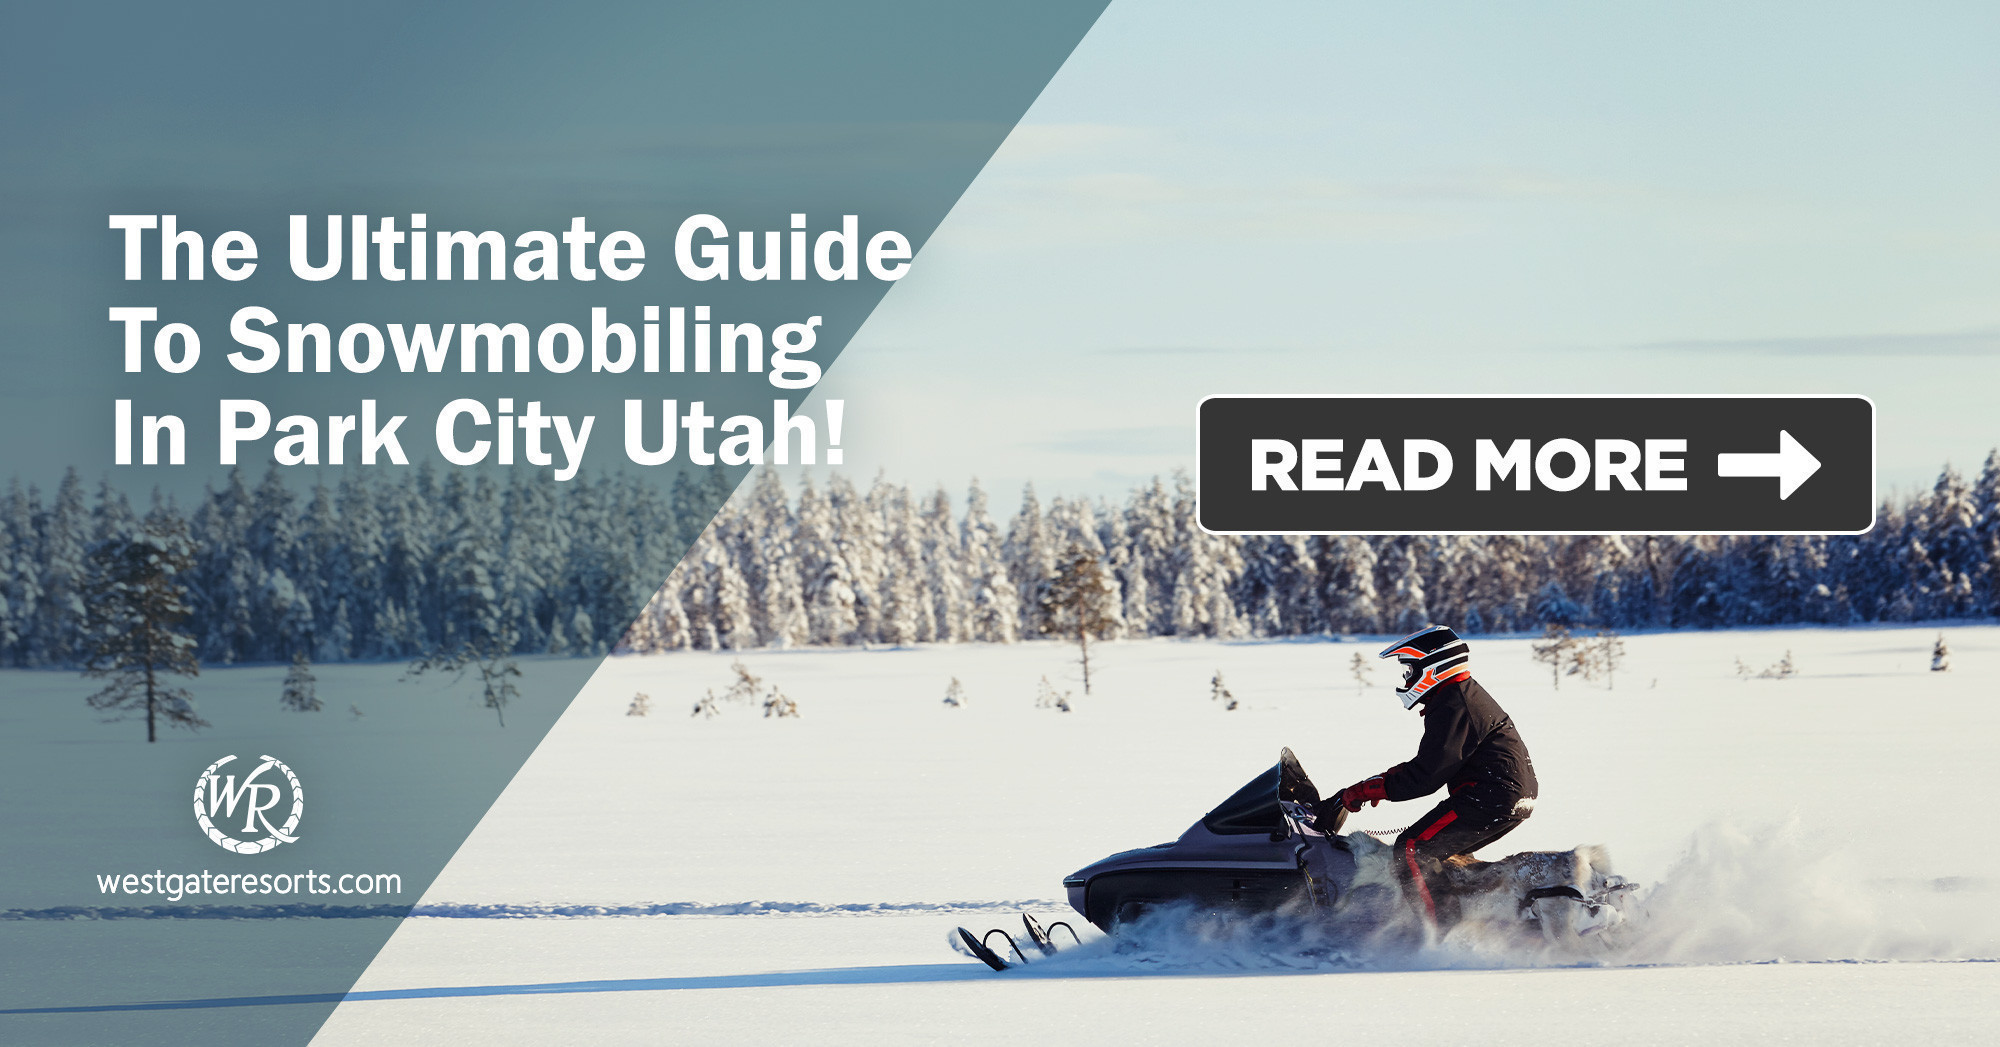 The Ultimate Guide to Snowmobiling in Park City Utah!